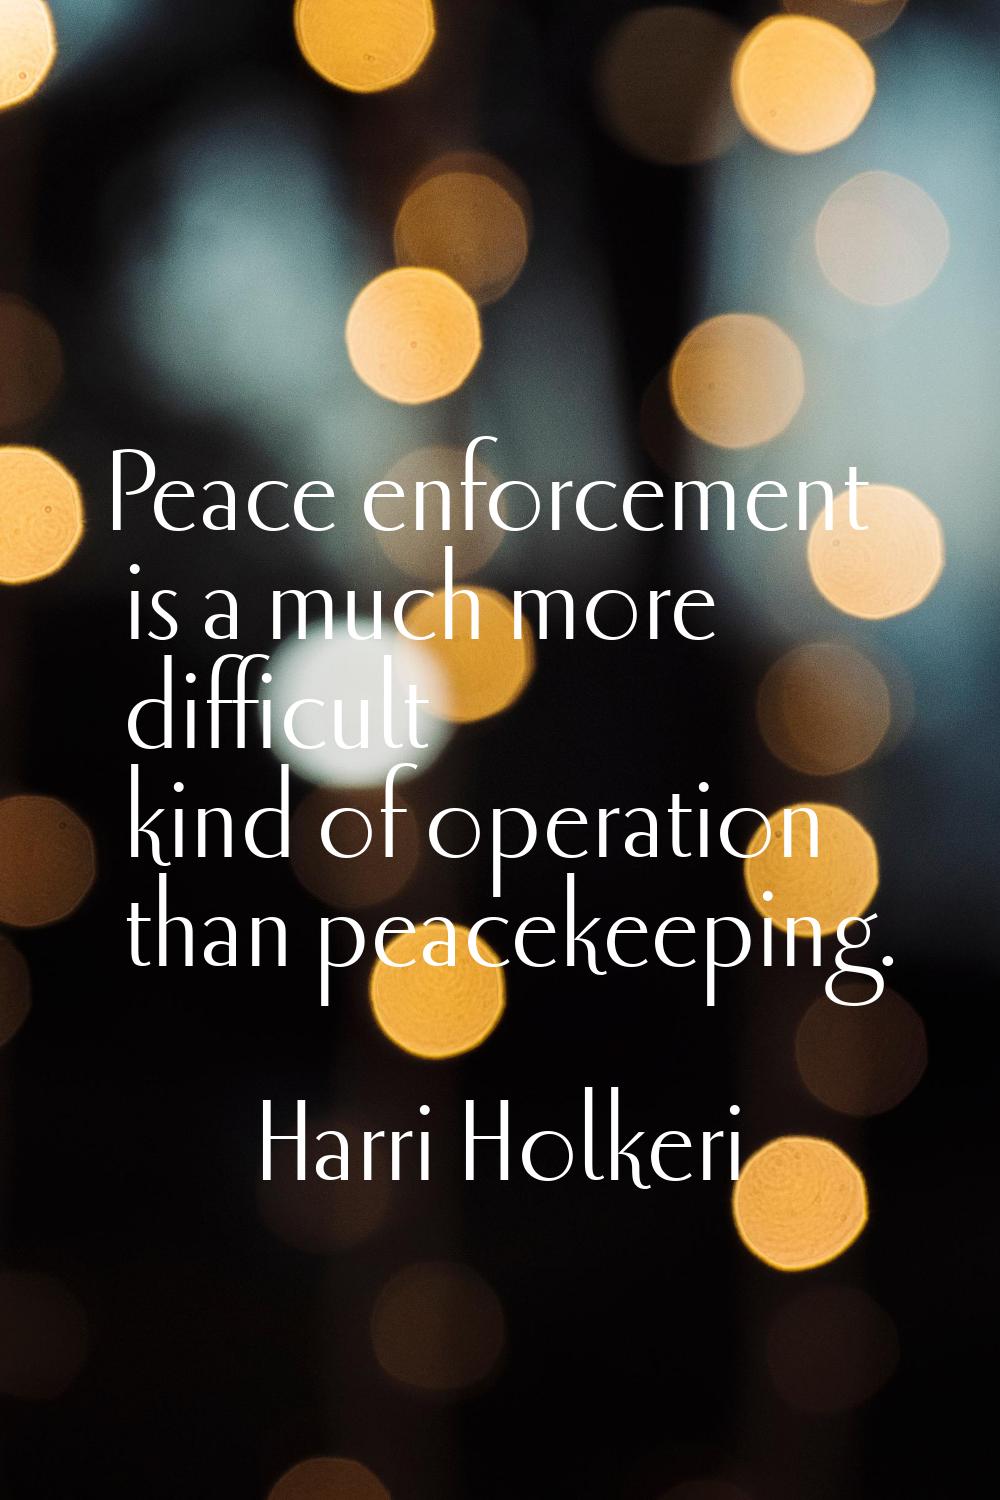 Peace enforcement is a much more difficult kind of operation than peacekeeping.